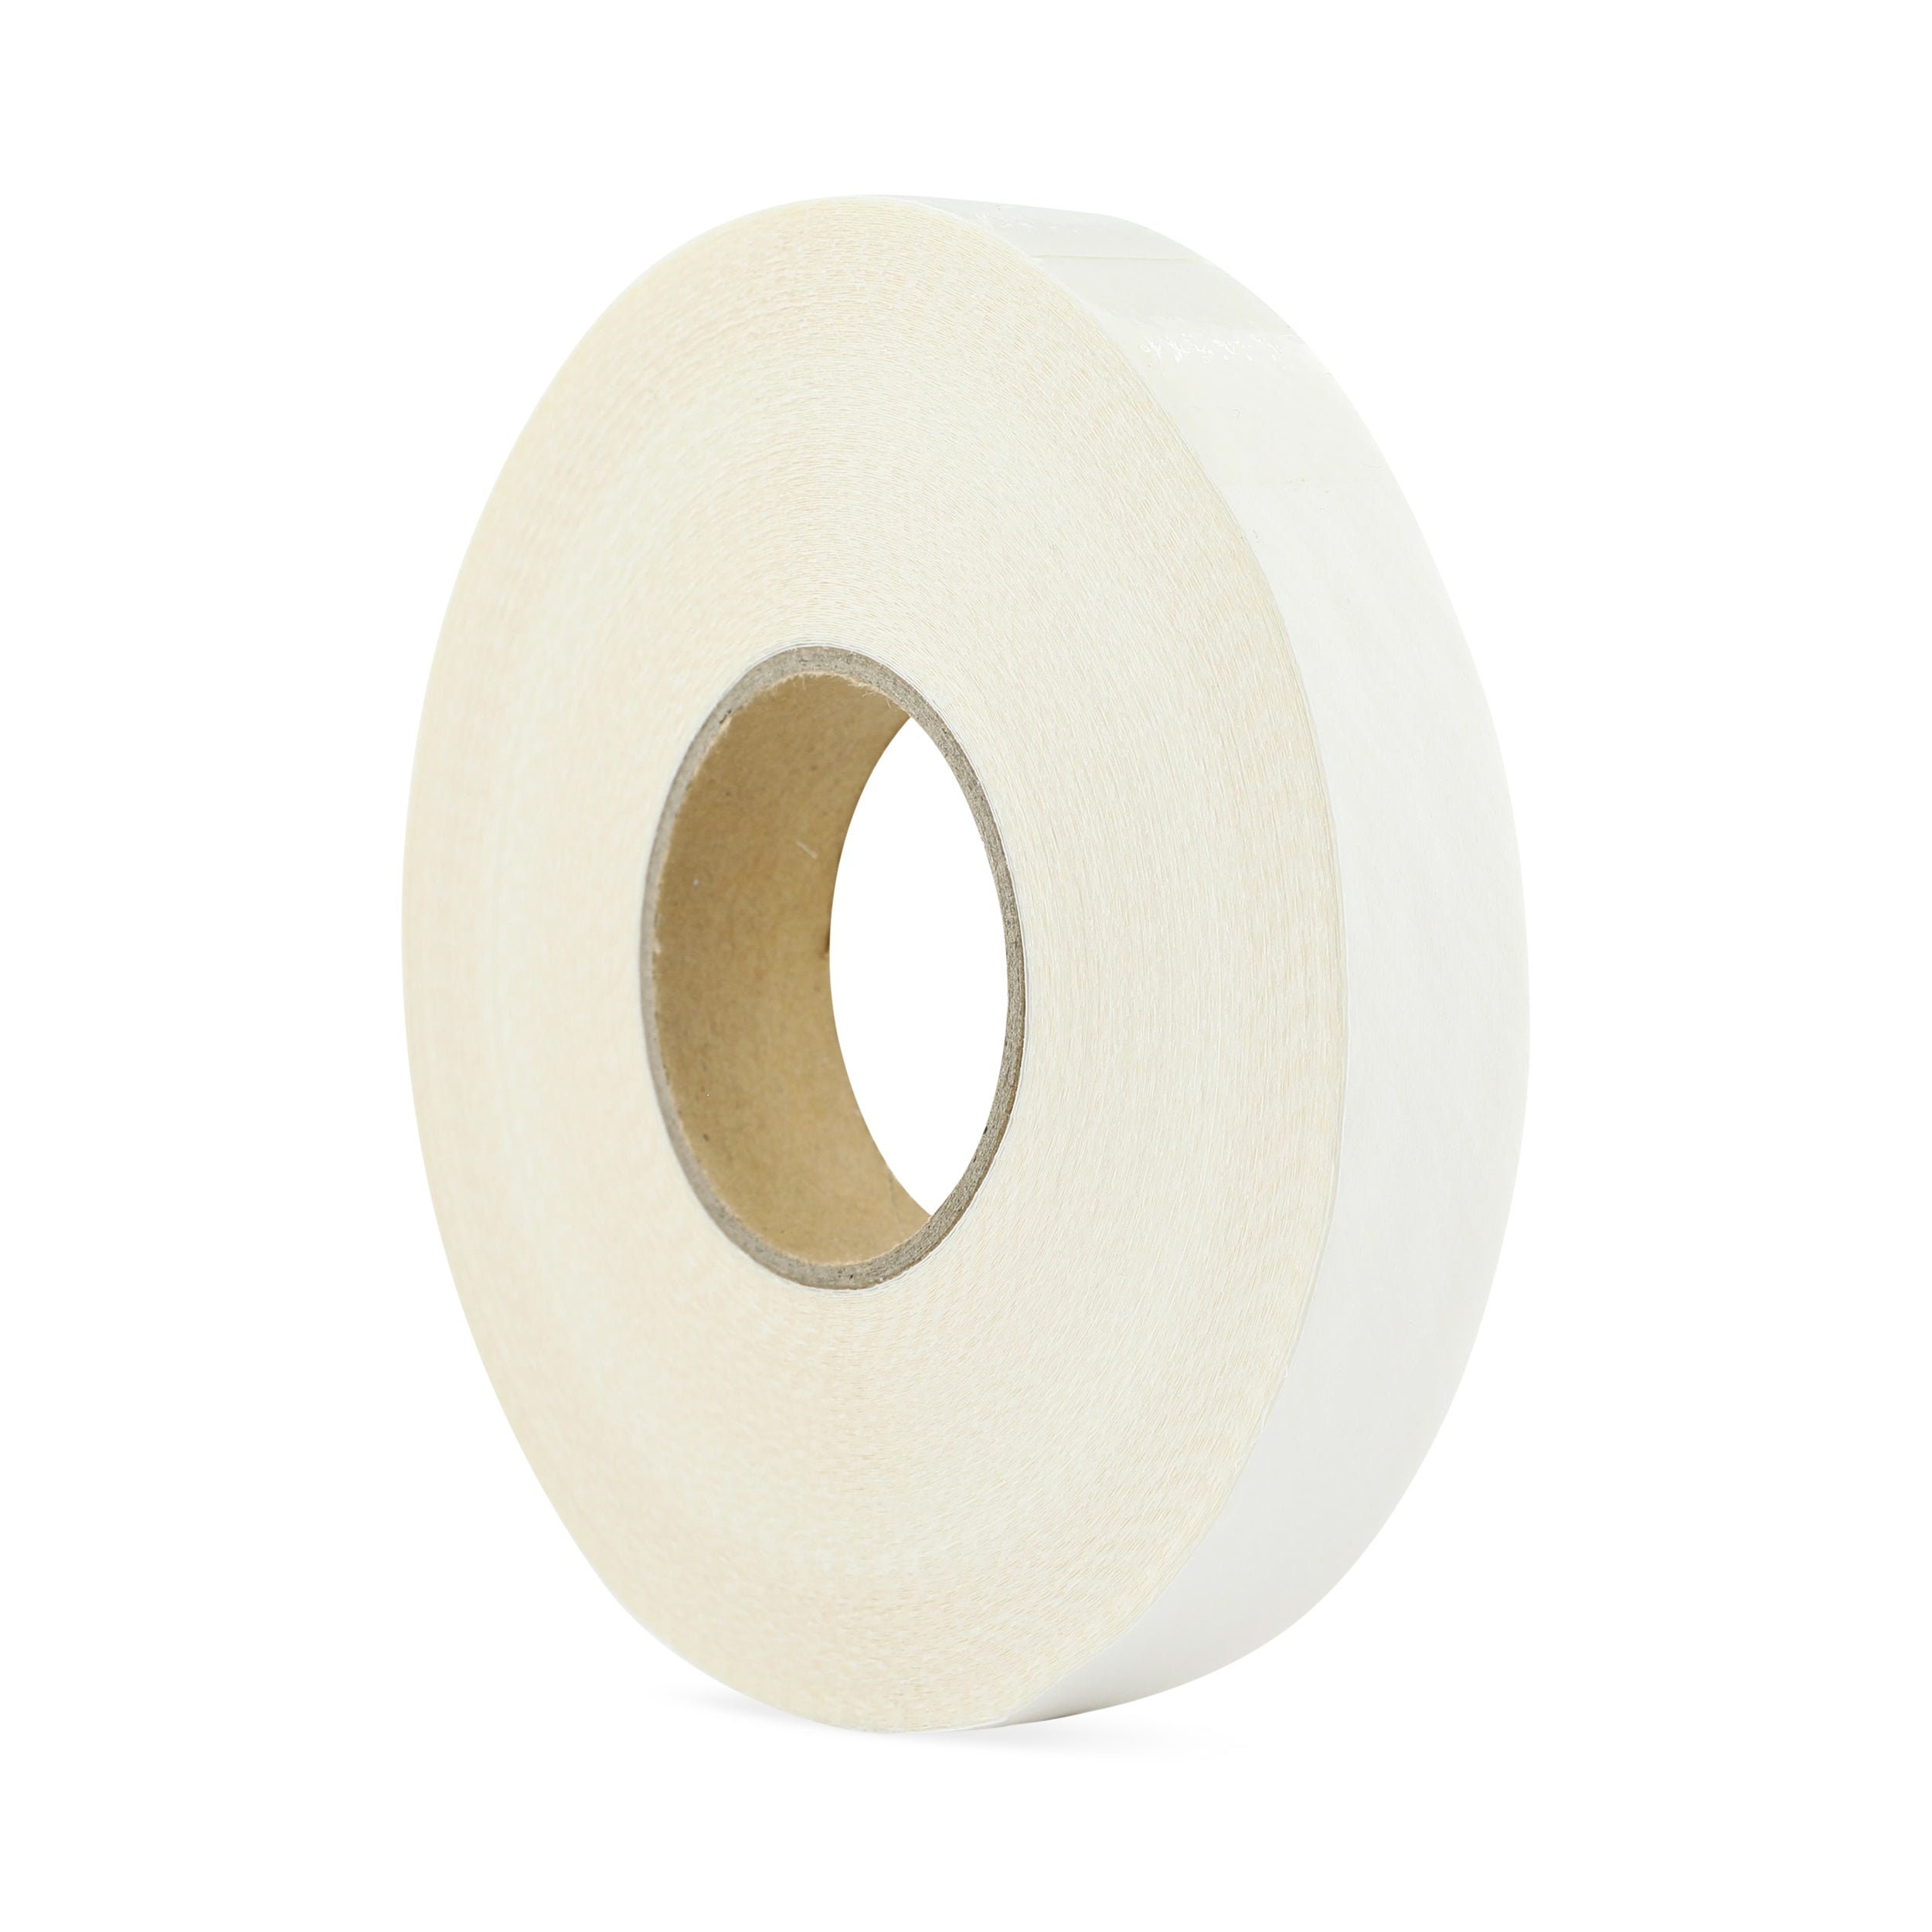 Leather Tape, Basting Tape, Double Sided Tape, Tape, Double Coated Tape,  Fabric Tape 1/8, 3/16, 1/4, 1/2, 3/4 